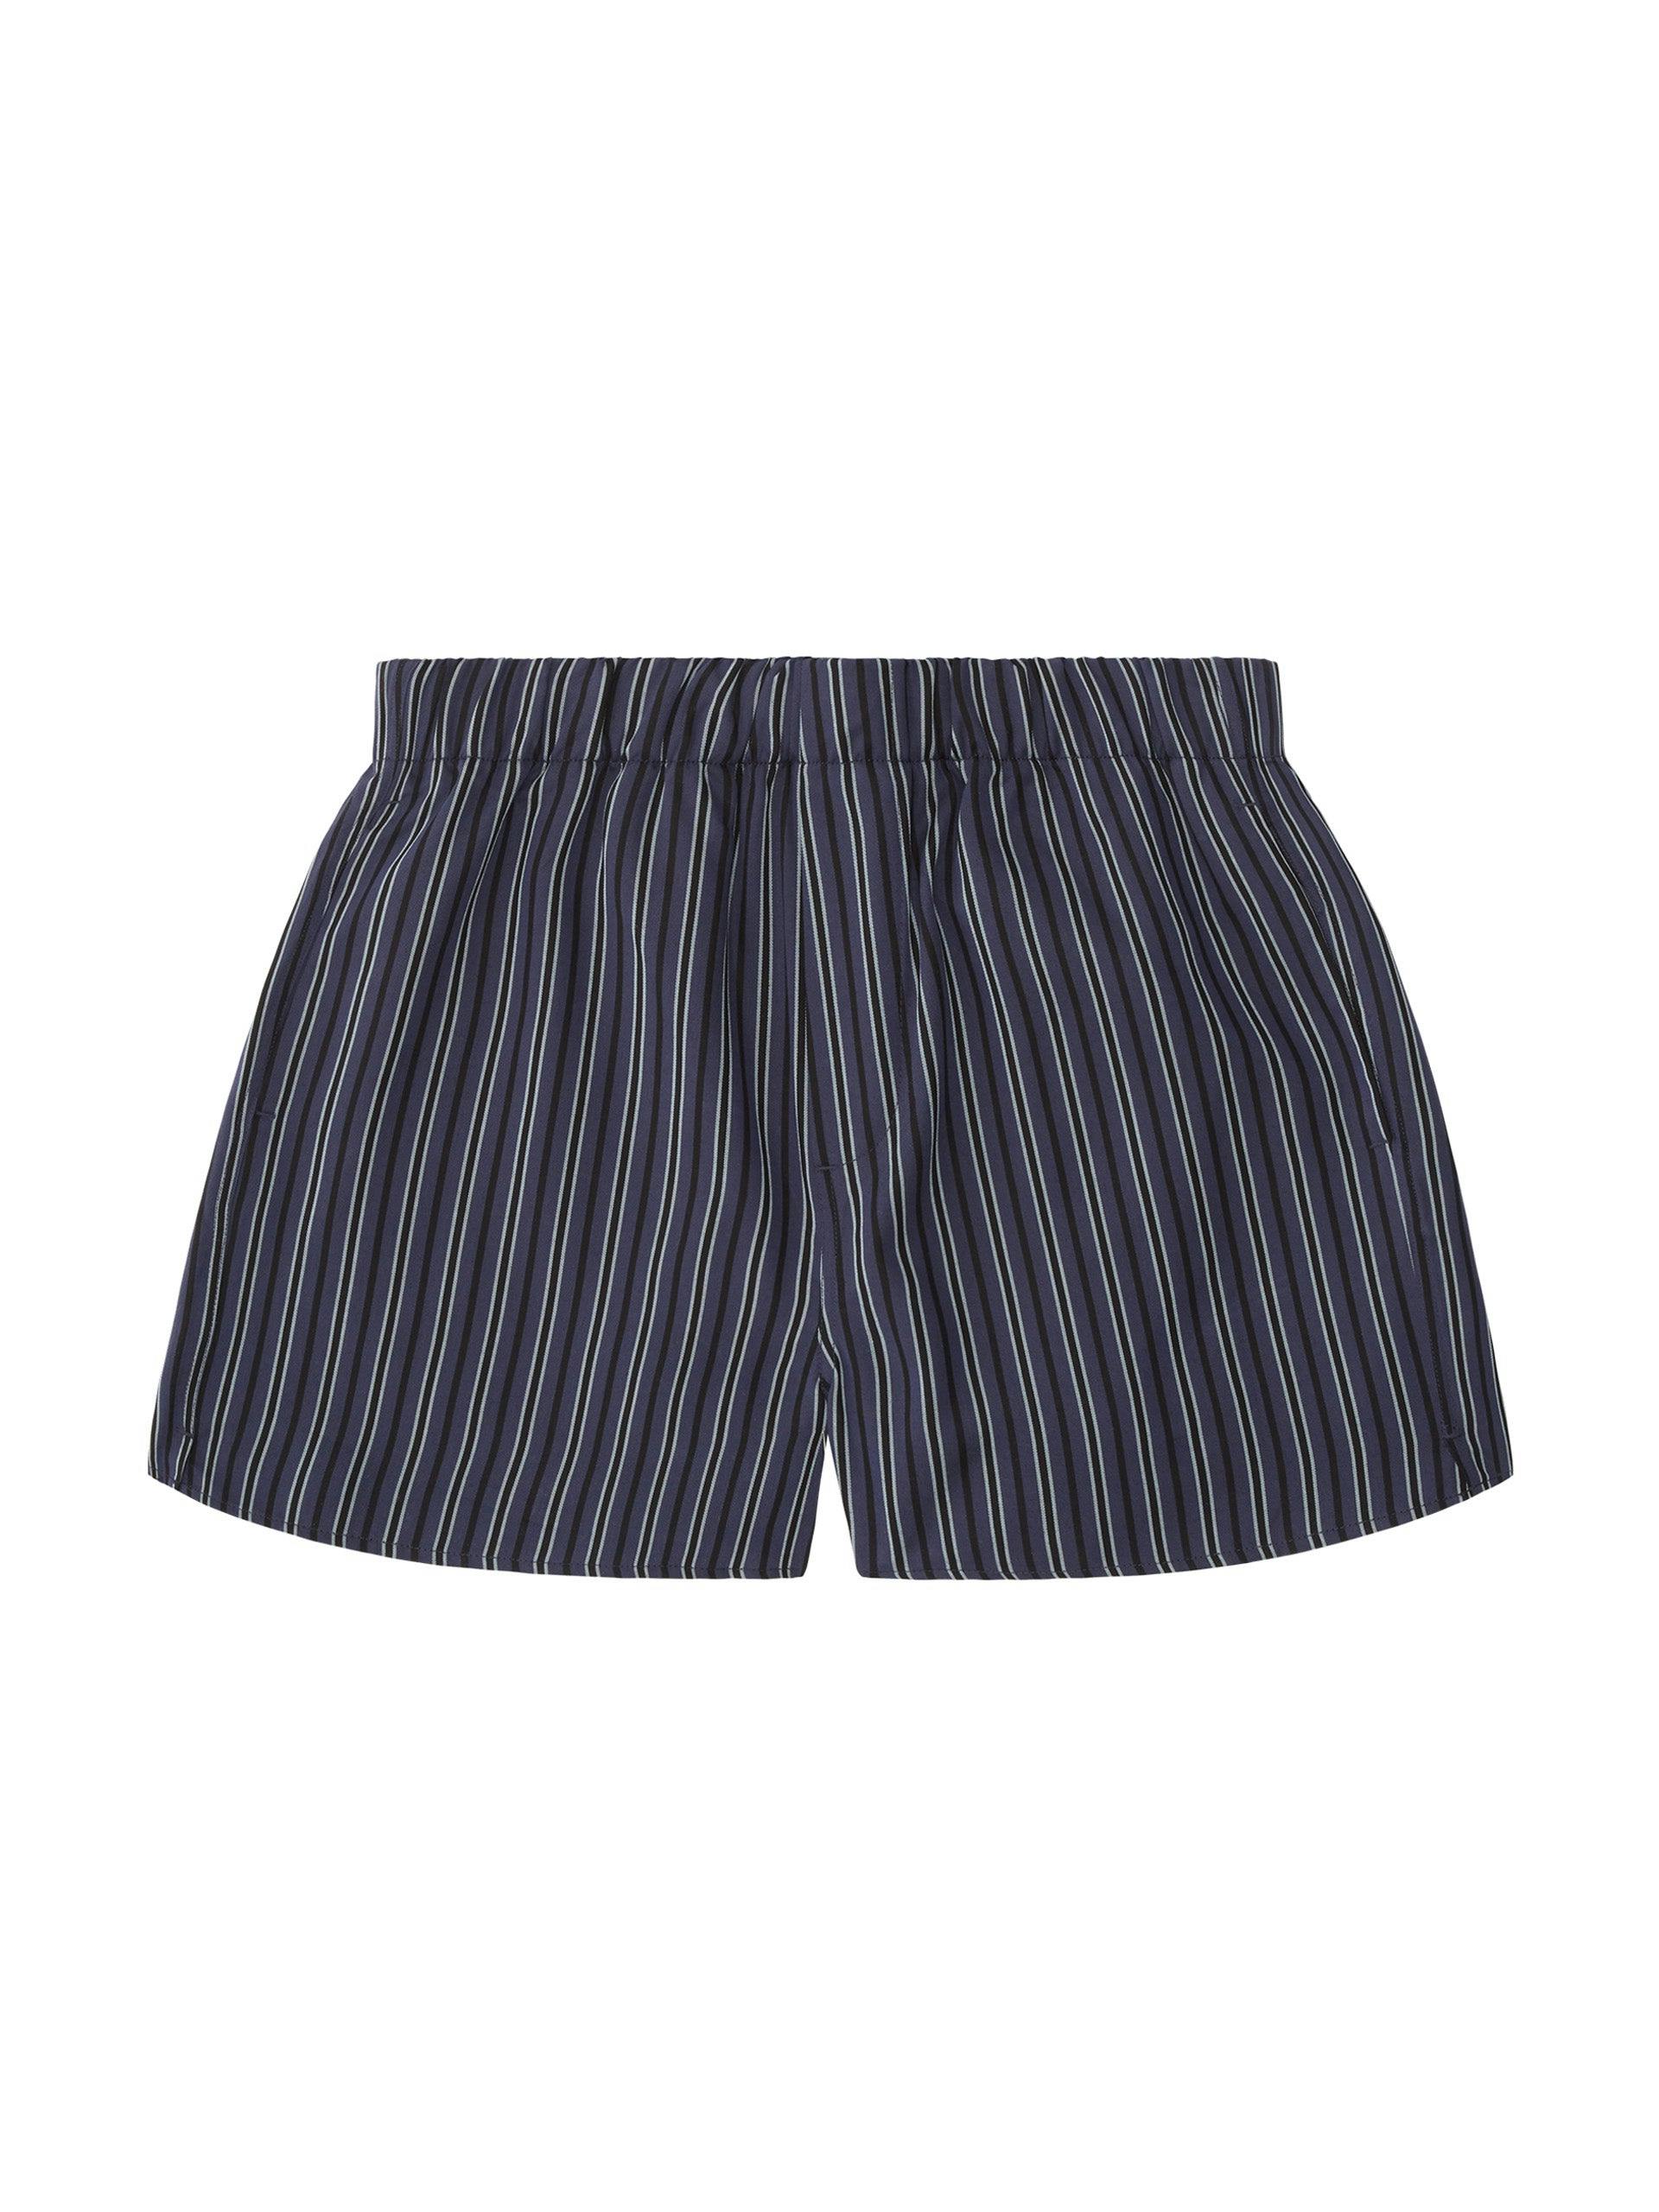 The Collagerie pinstripe short